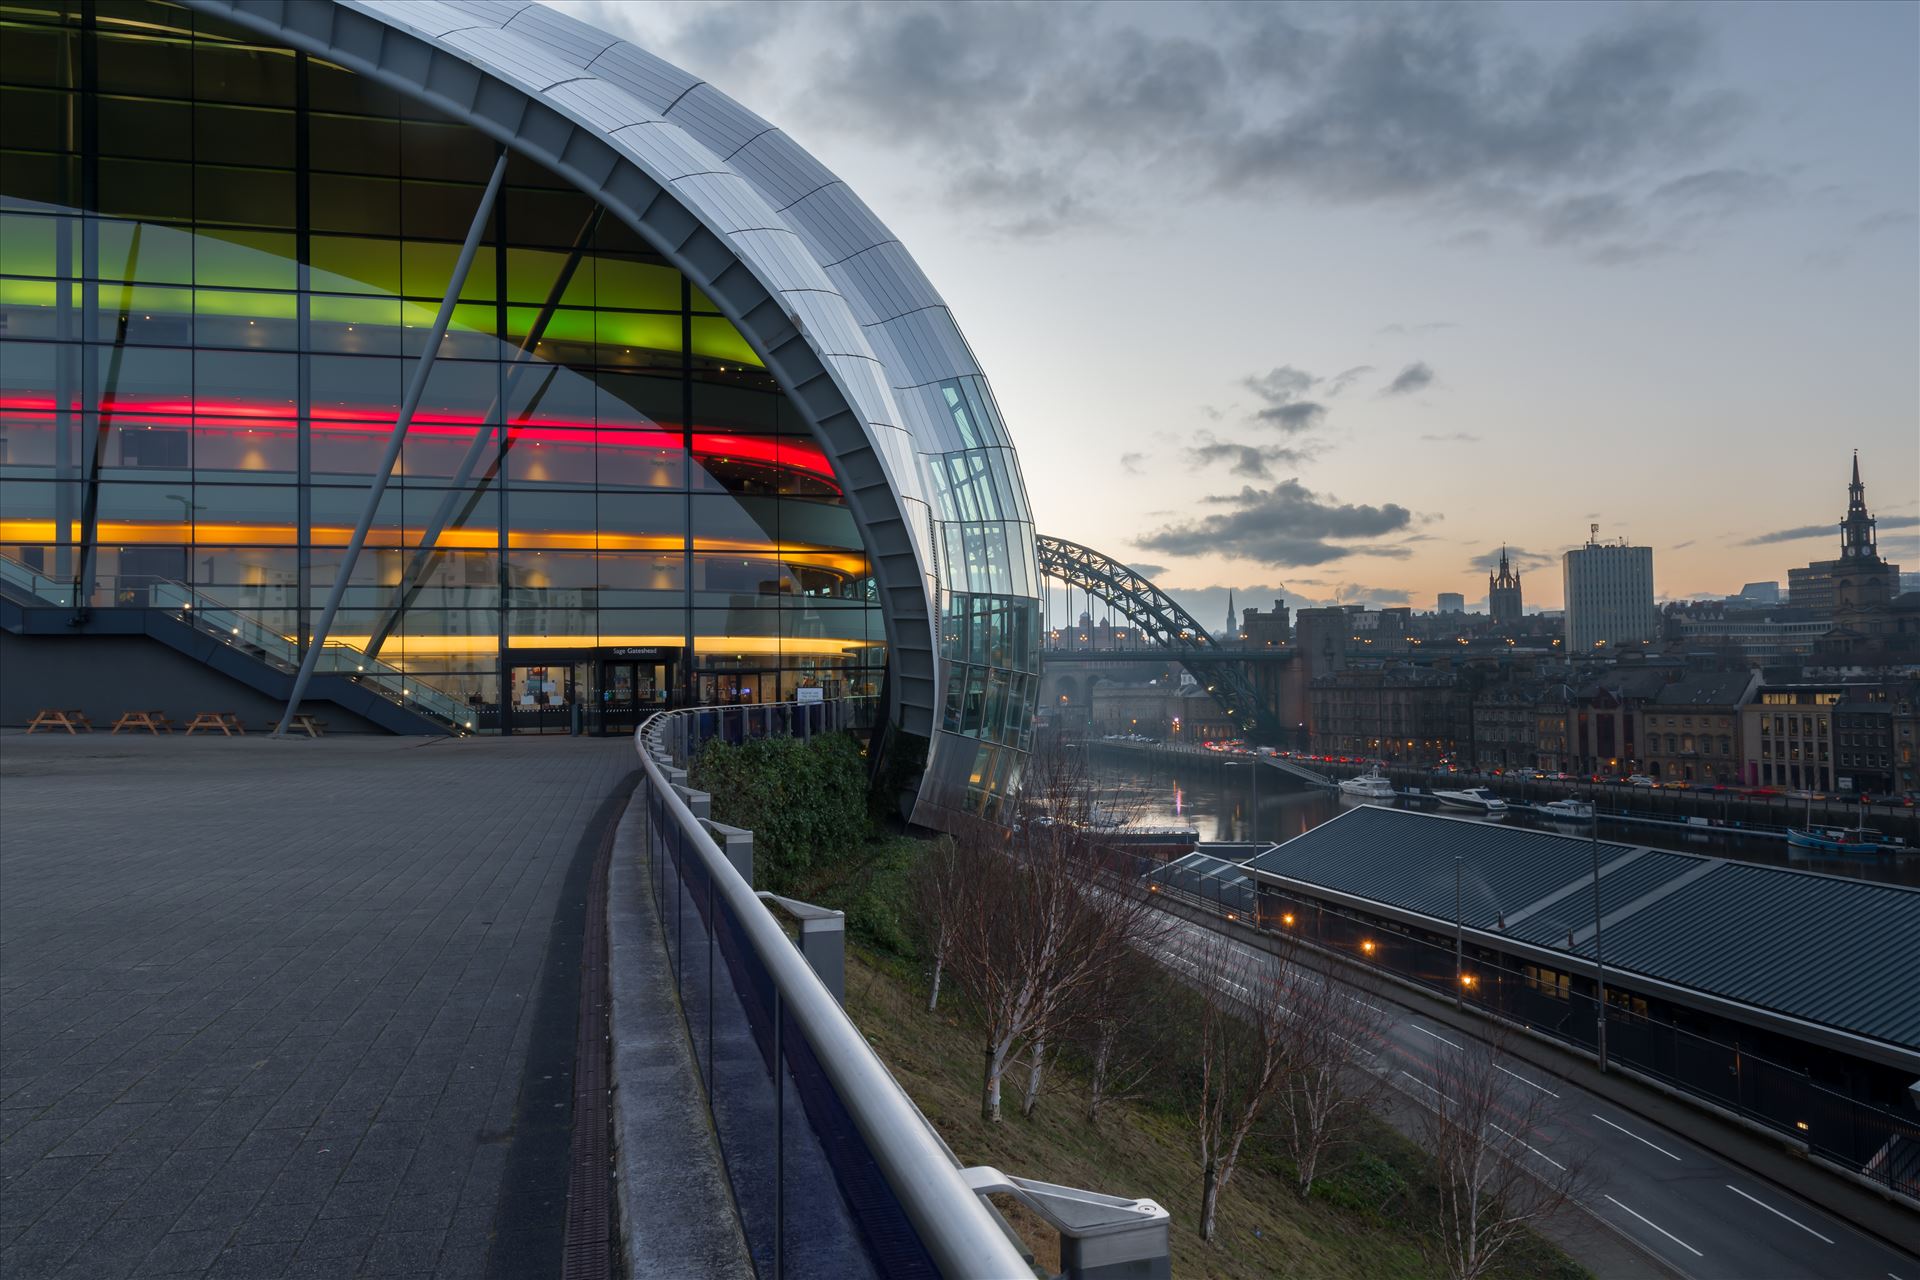 The Sage, Gateshead - The Sage building is a concert venue and also a centre for musical education, located in Gateshead on the south bank of the River Tyne, in the North East of England. It opened in 2004. by philreay